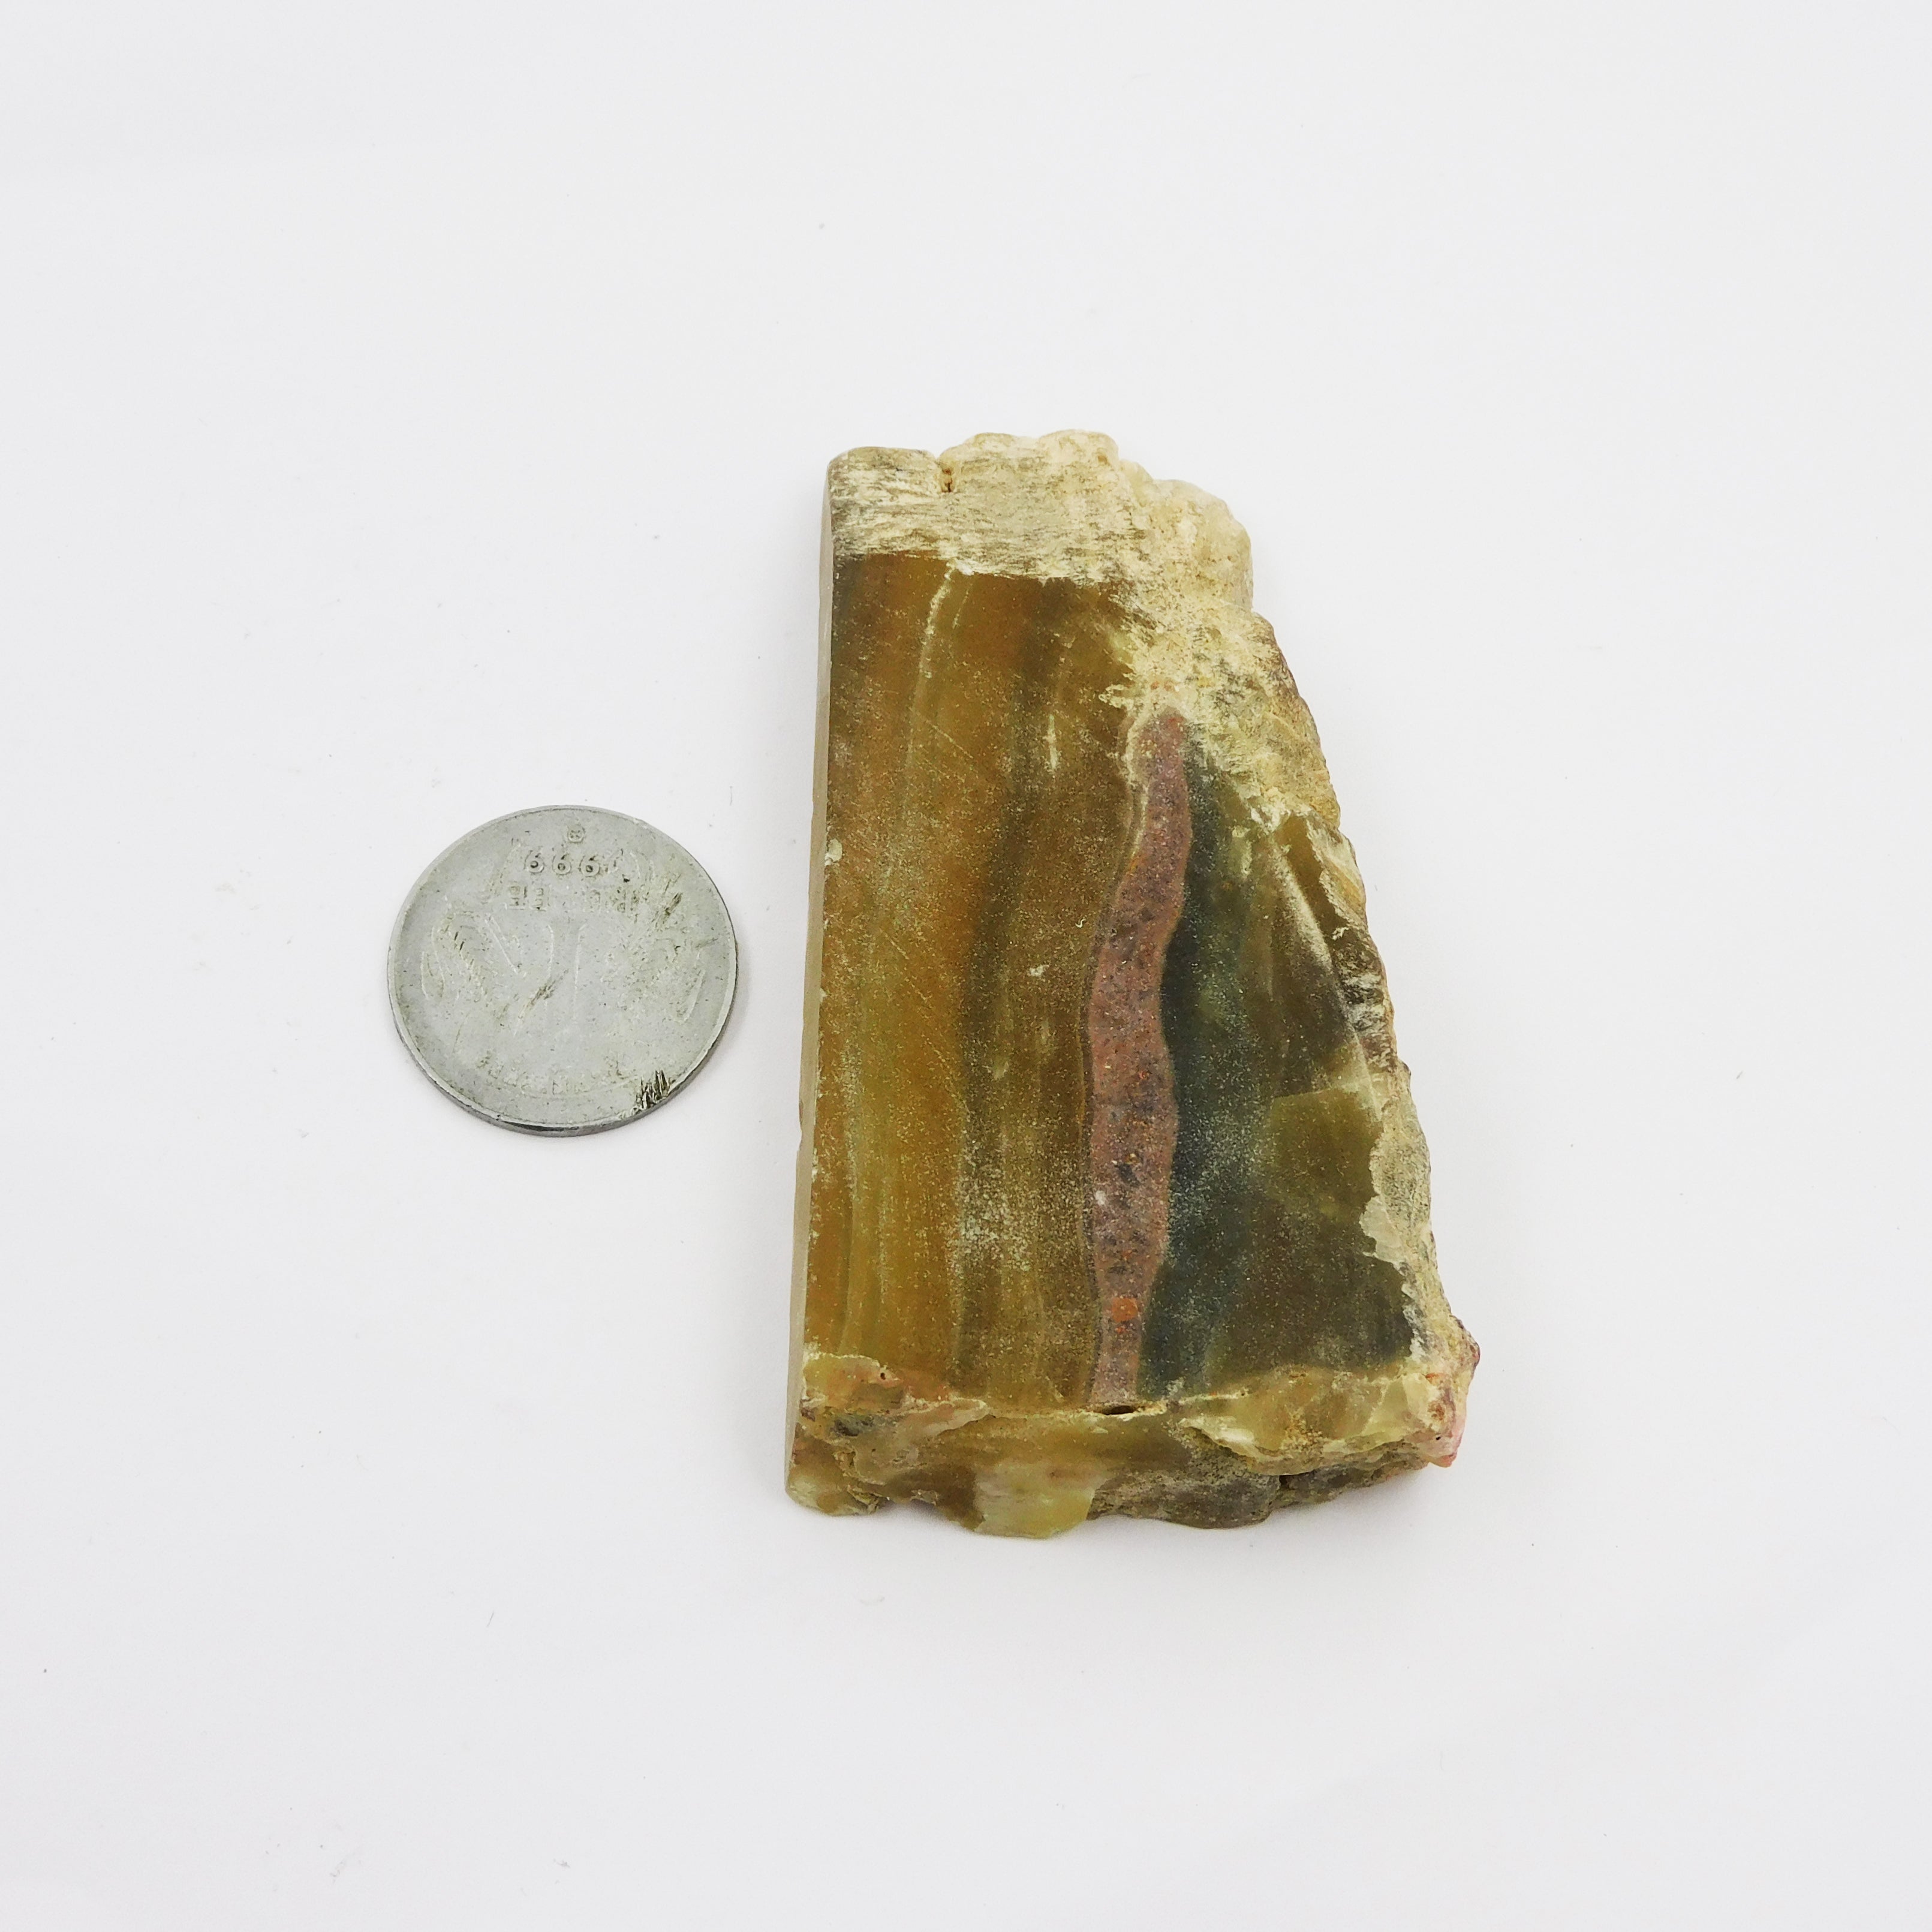 Natural Tiger Eye Raw Rough 633.52 Carat Yellow Uncut CERTIFIED Loose Gemstone Rough Huge Surprising Certified Excellence Quality Rocks and Minerals Loose Gems